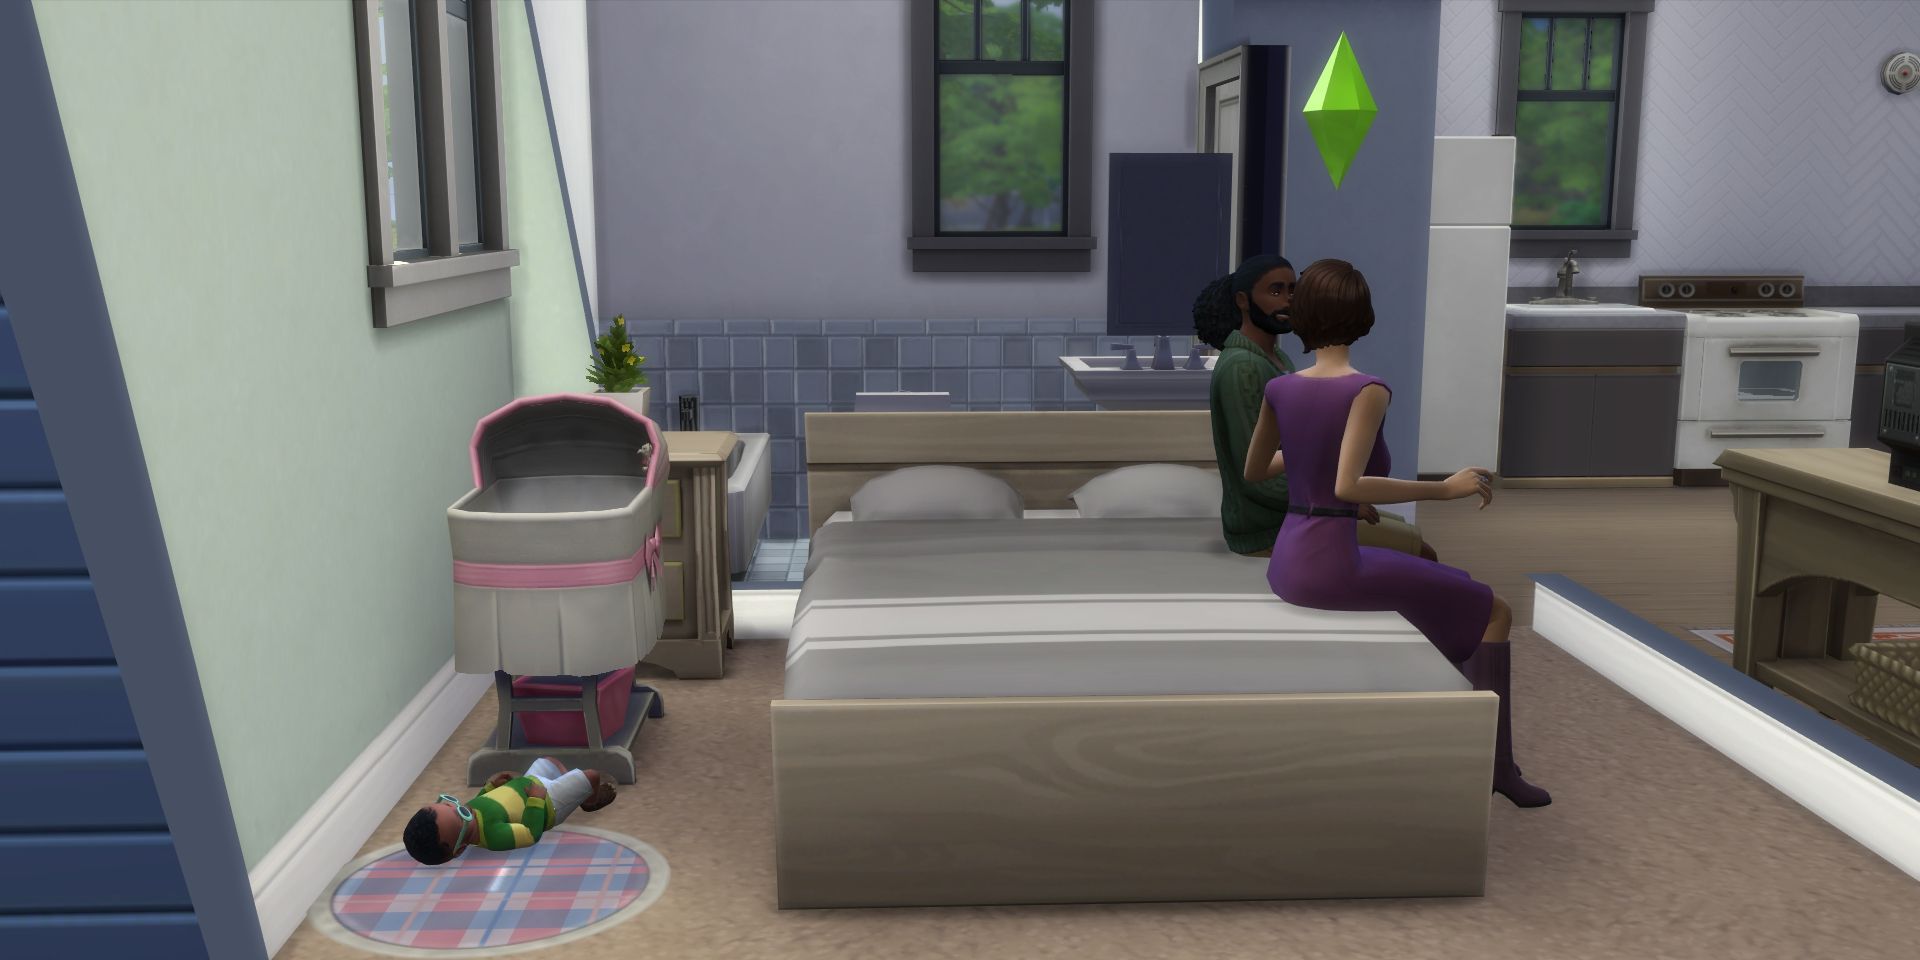 two Sims sitting talking on the edge of the bed;  Their baby is lying on a play mat on the floor across from the bed.